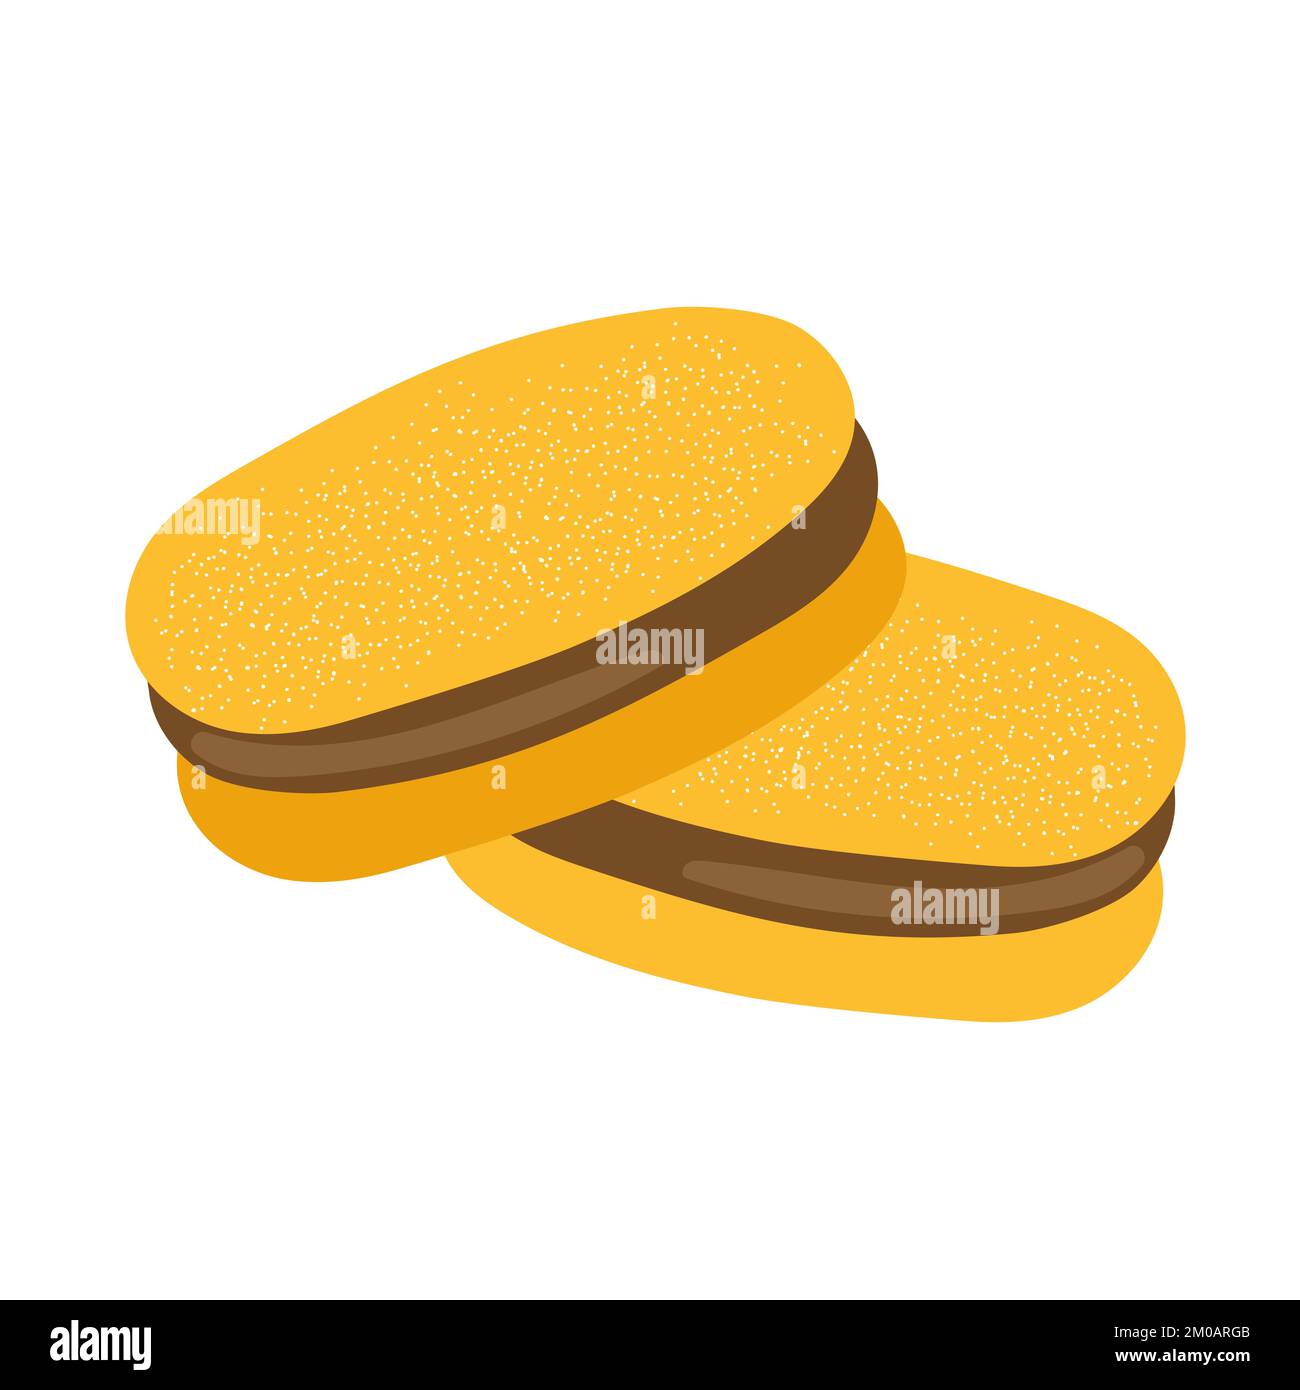 Alfajor de maicena, traditional Chilean sandwich cookies filled with condensed milk or chocolate. Isolated vector clip art illustration. Stock Vector